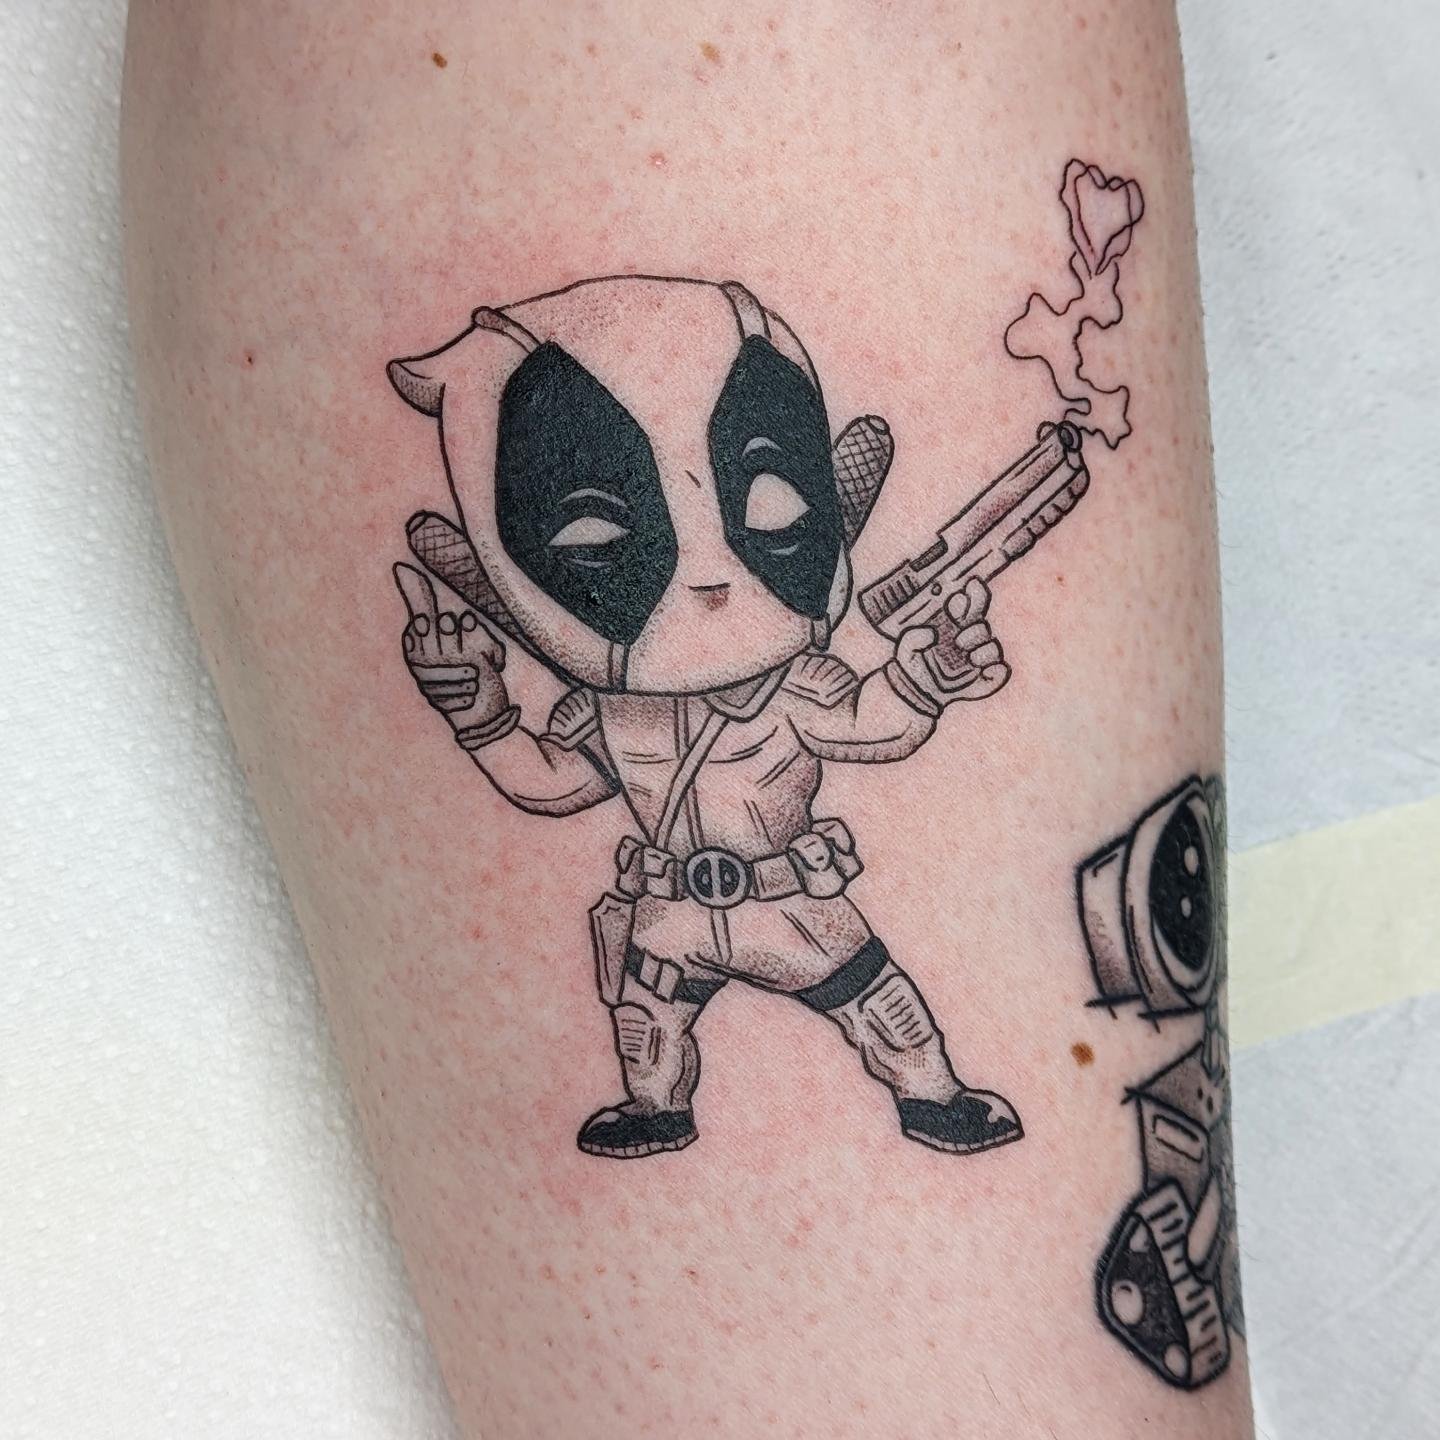 Deadpool made for Harriet 😎😎👌👌
Love doing this sort of stuff!

Space available for late May. DM me with your ideas! 😍

&bull;&bull;&bull;&bull;&bull;&bull;&bull;&bull;&bull;&bull;&bull;&bull;&bull;&bull;&bull;&bull;&bull;&bull;&bull;&bull;&bull;